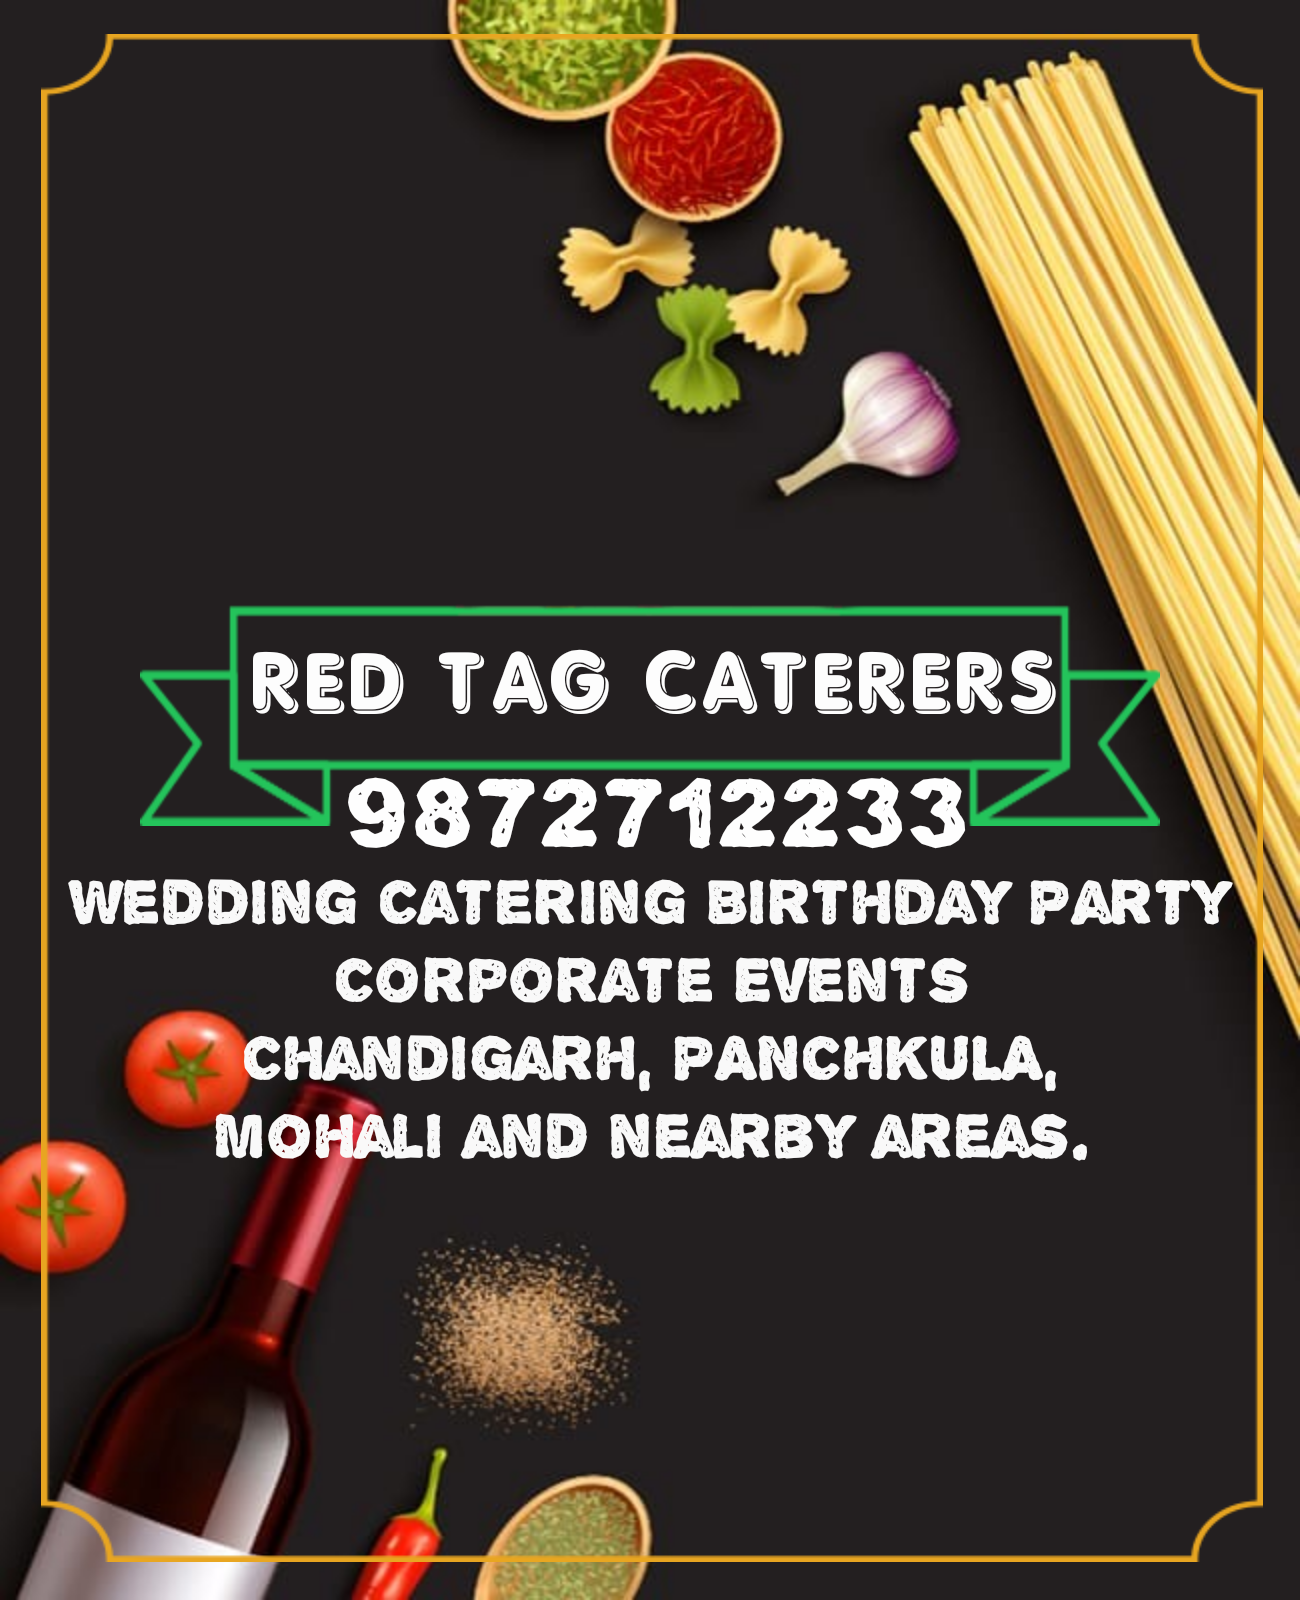 Best Caterers in Mohali, | Red Tag Caterers | Best wedding planer in Mohali, - GL80466